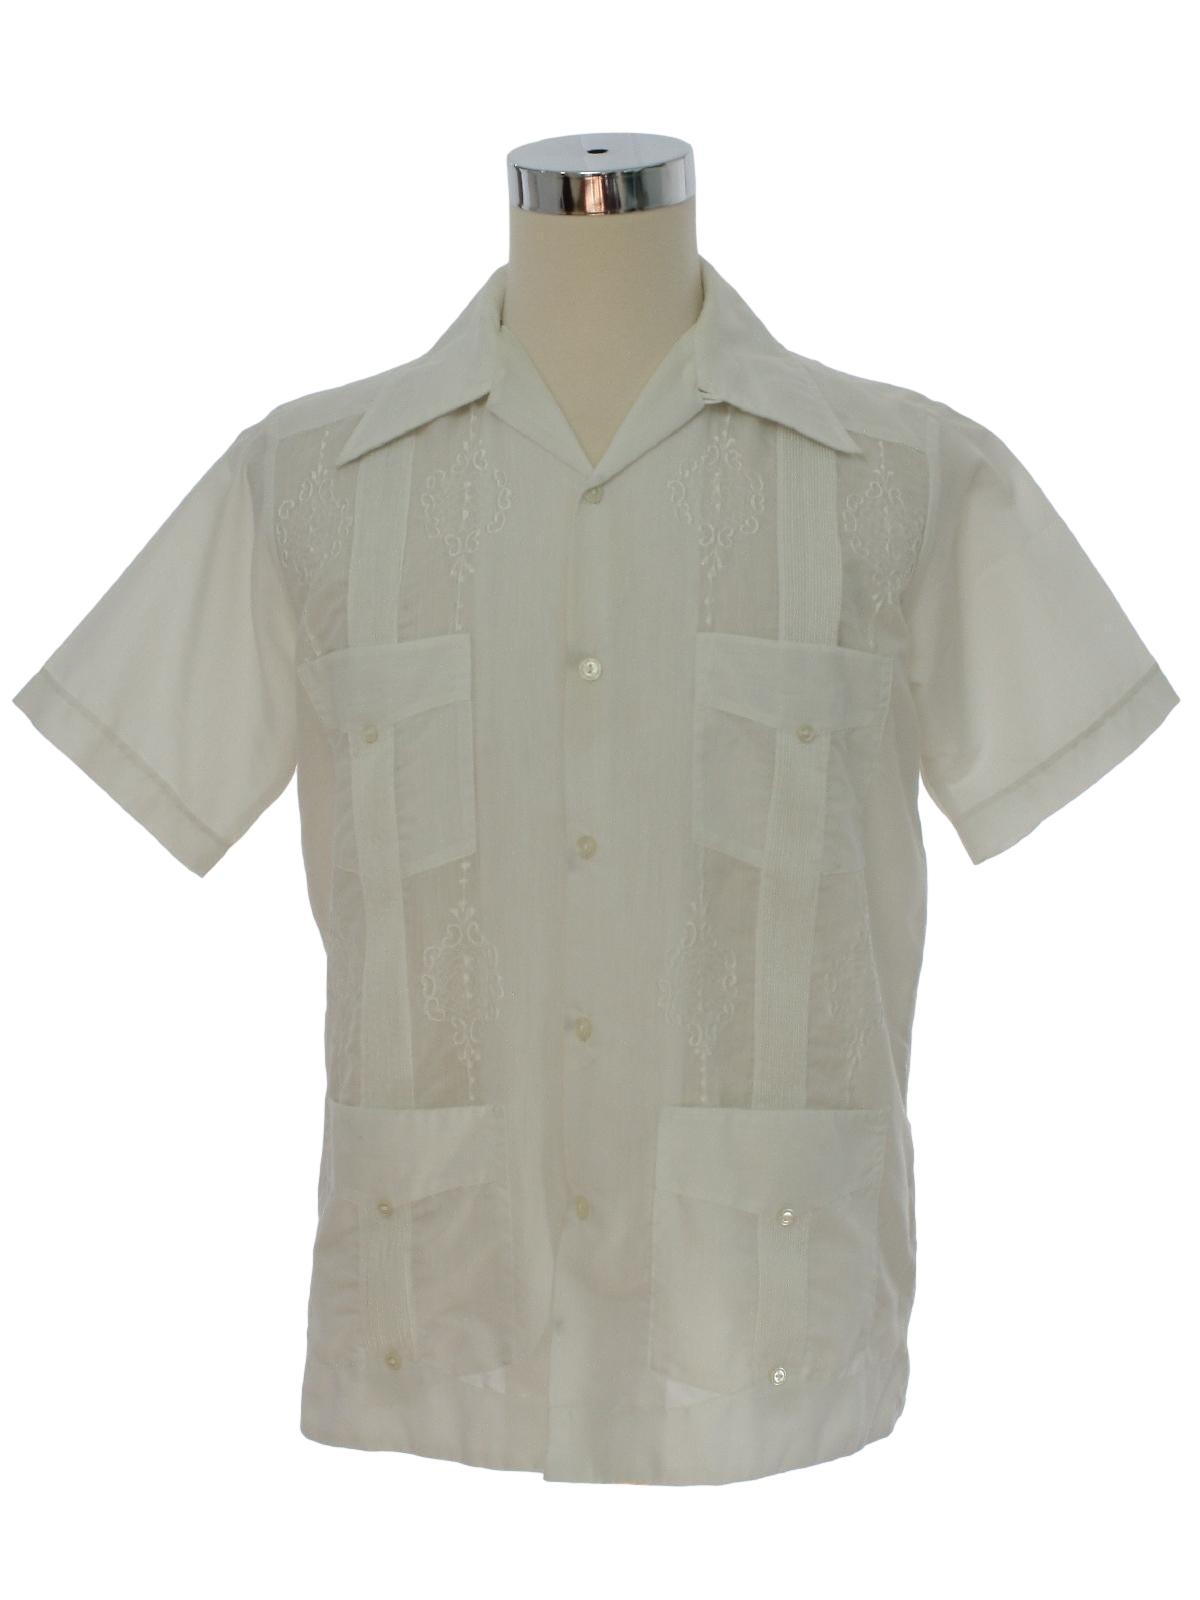 1970s Vintage Shirt: 70s -Contintal- This white blended cotton short